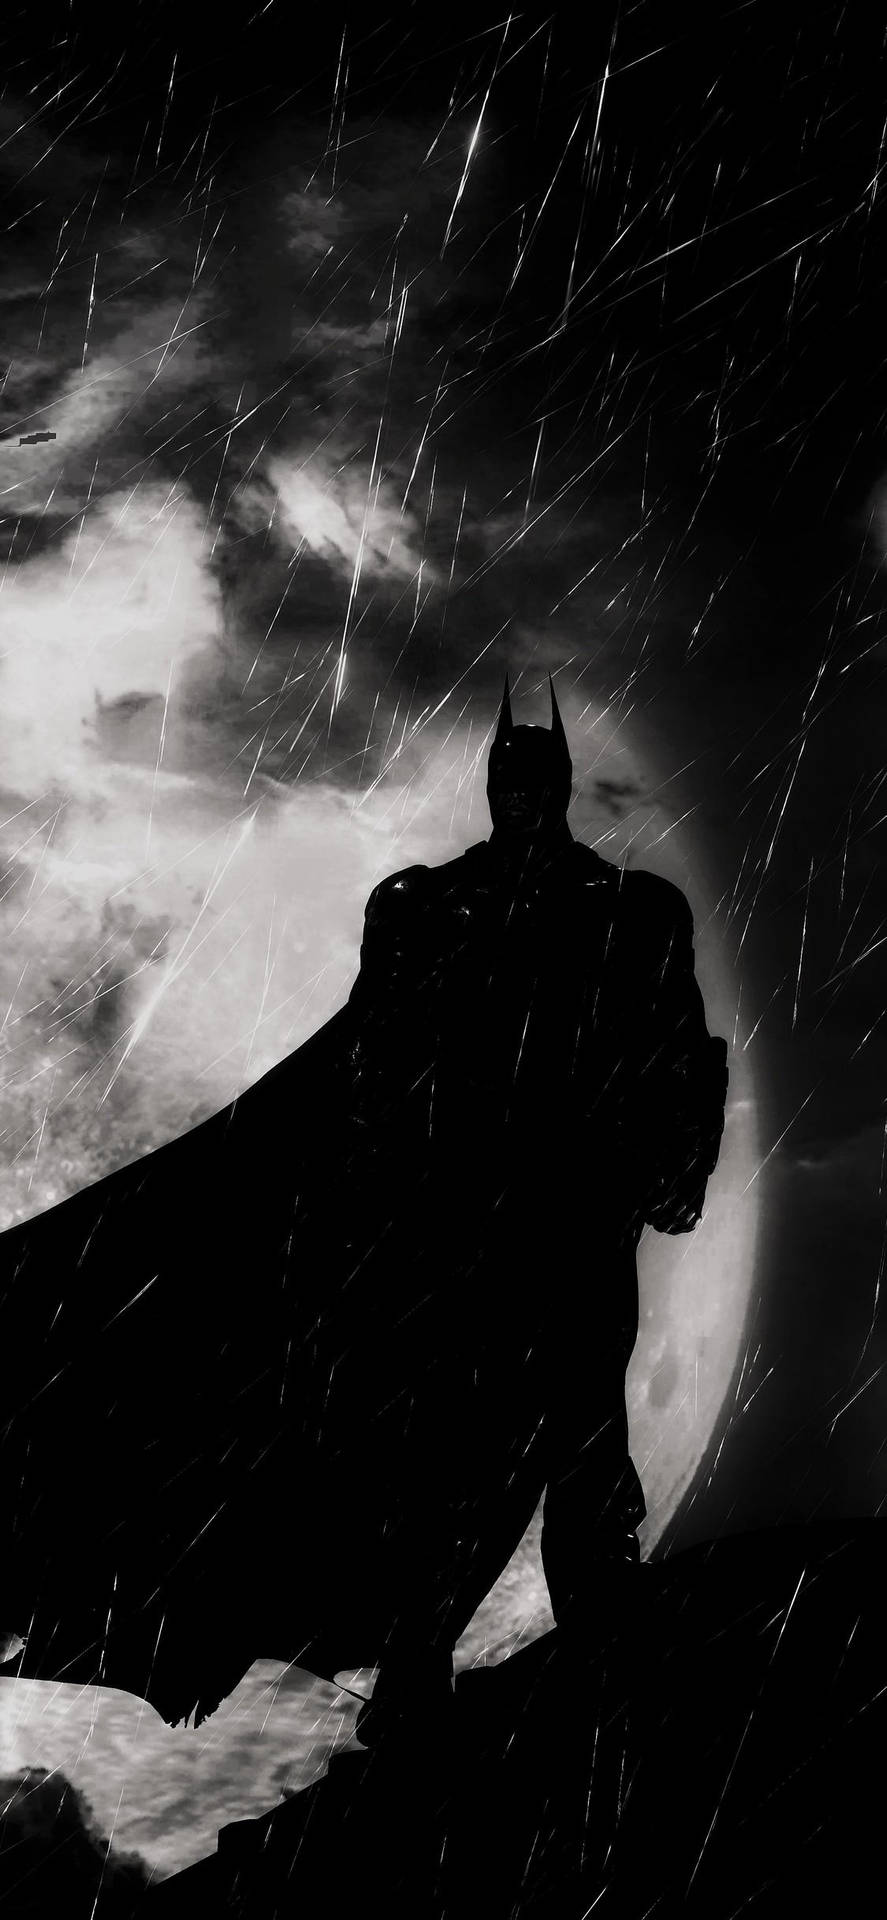 Black And White Silhouette Of Batman Arkham Knight iPhone Wallpaper